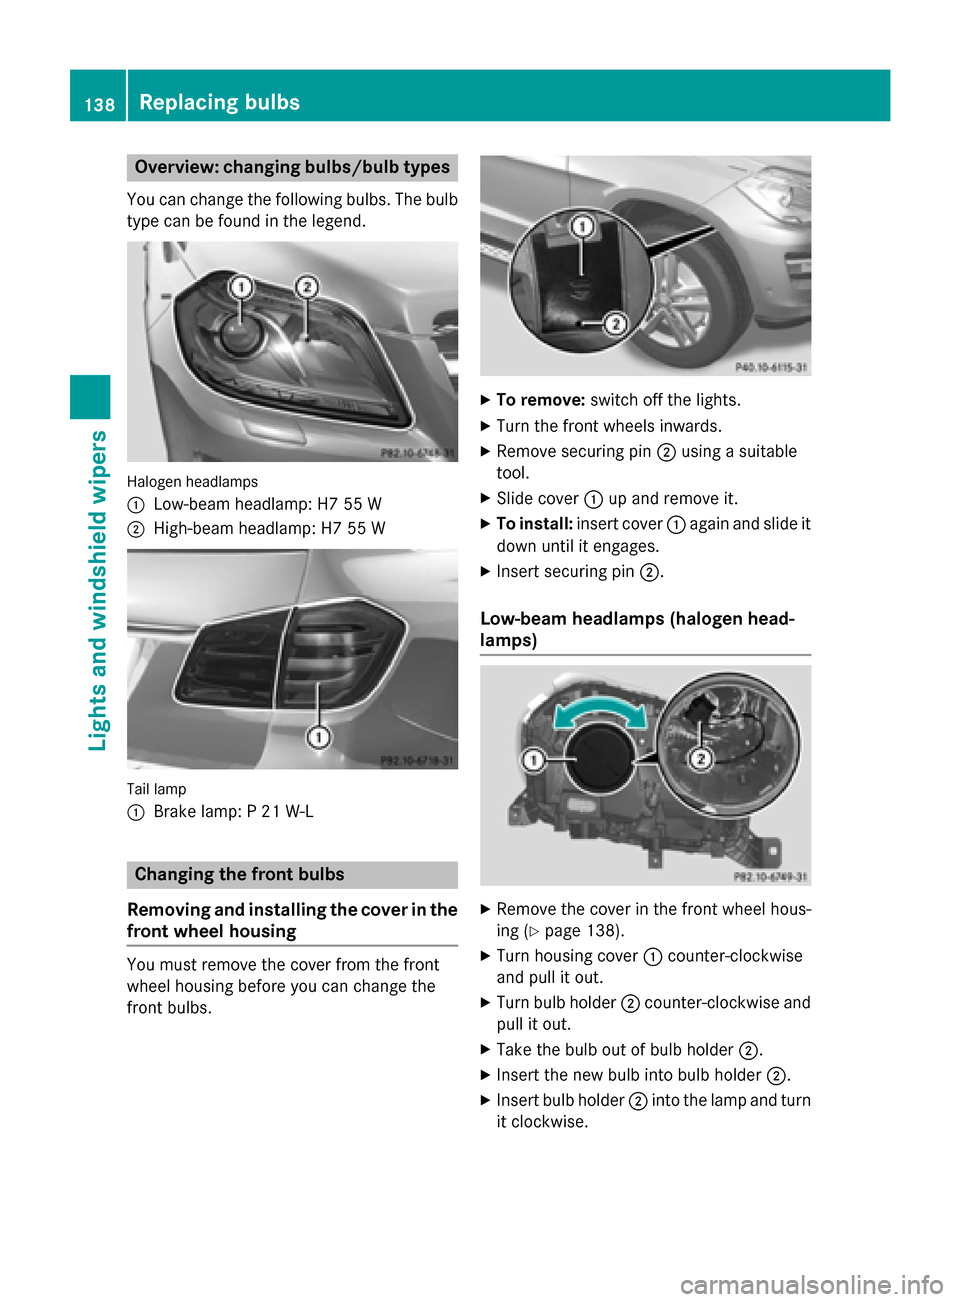 MERCEDES-BENZ GL-Class 2015 X166 Owners Manual Overview: changing bulbs/bulb types
You can change the following bulbs. The bulb type can be found in the legend. Halogen headlamps
0043
Low-beam headlamp: H7 55 W
0044 High-beam headlamp: H7 55 W Tai